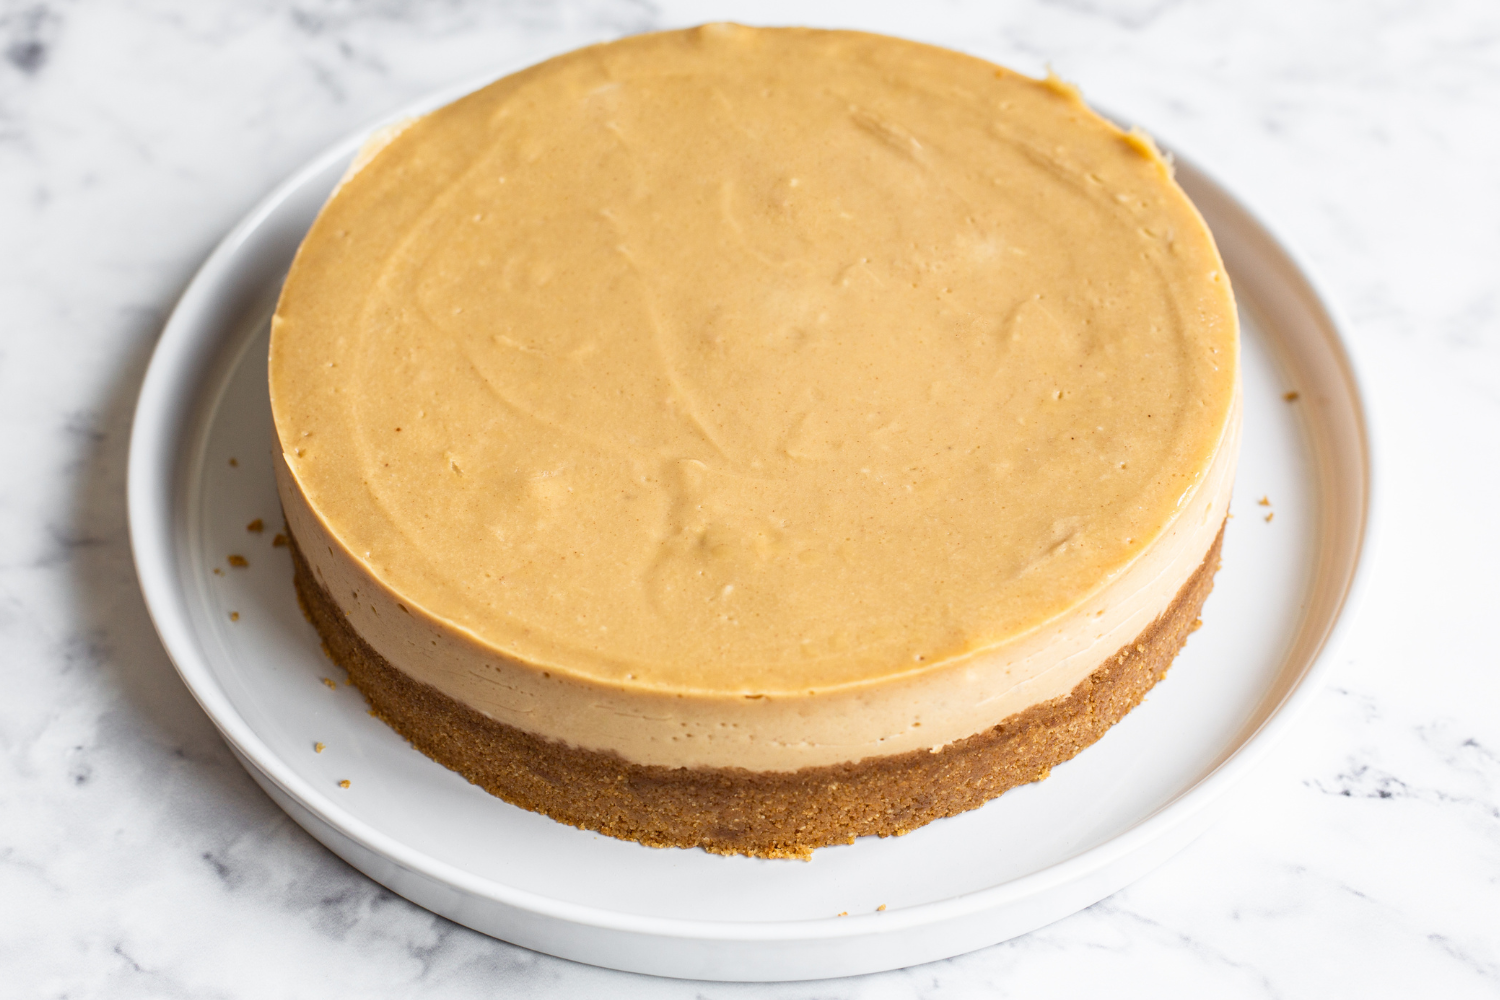 the whole Ultimate Peanut Butter Cheesecake, perfectly flat and no cracks in sight!